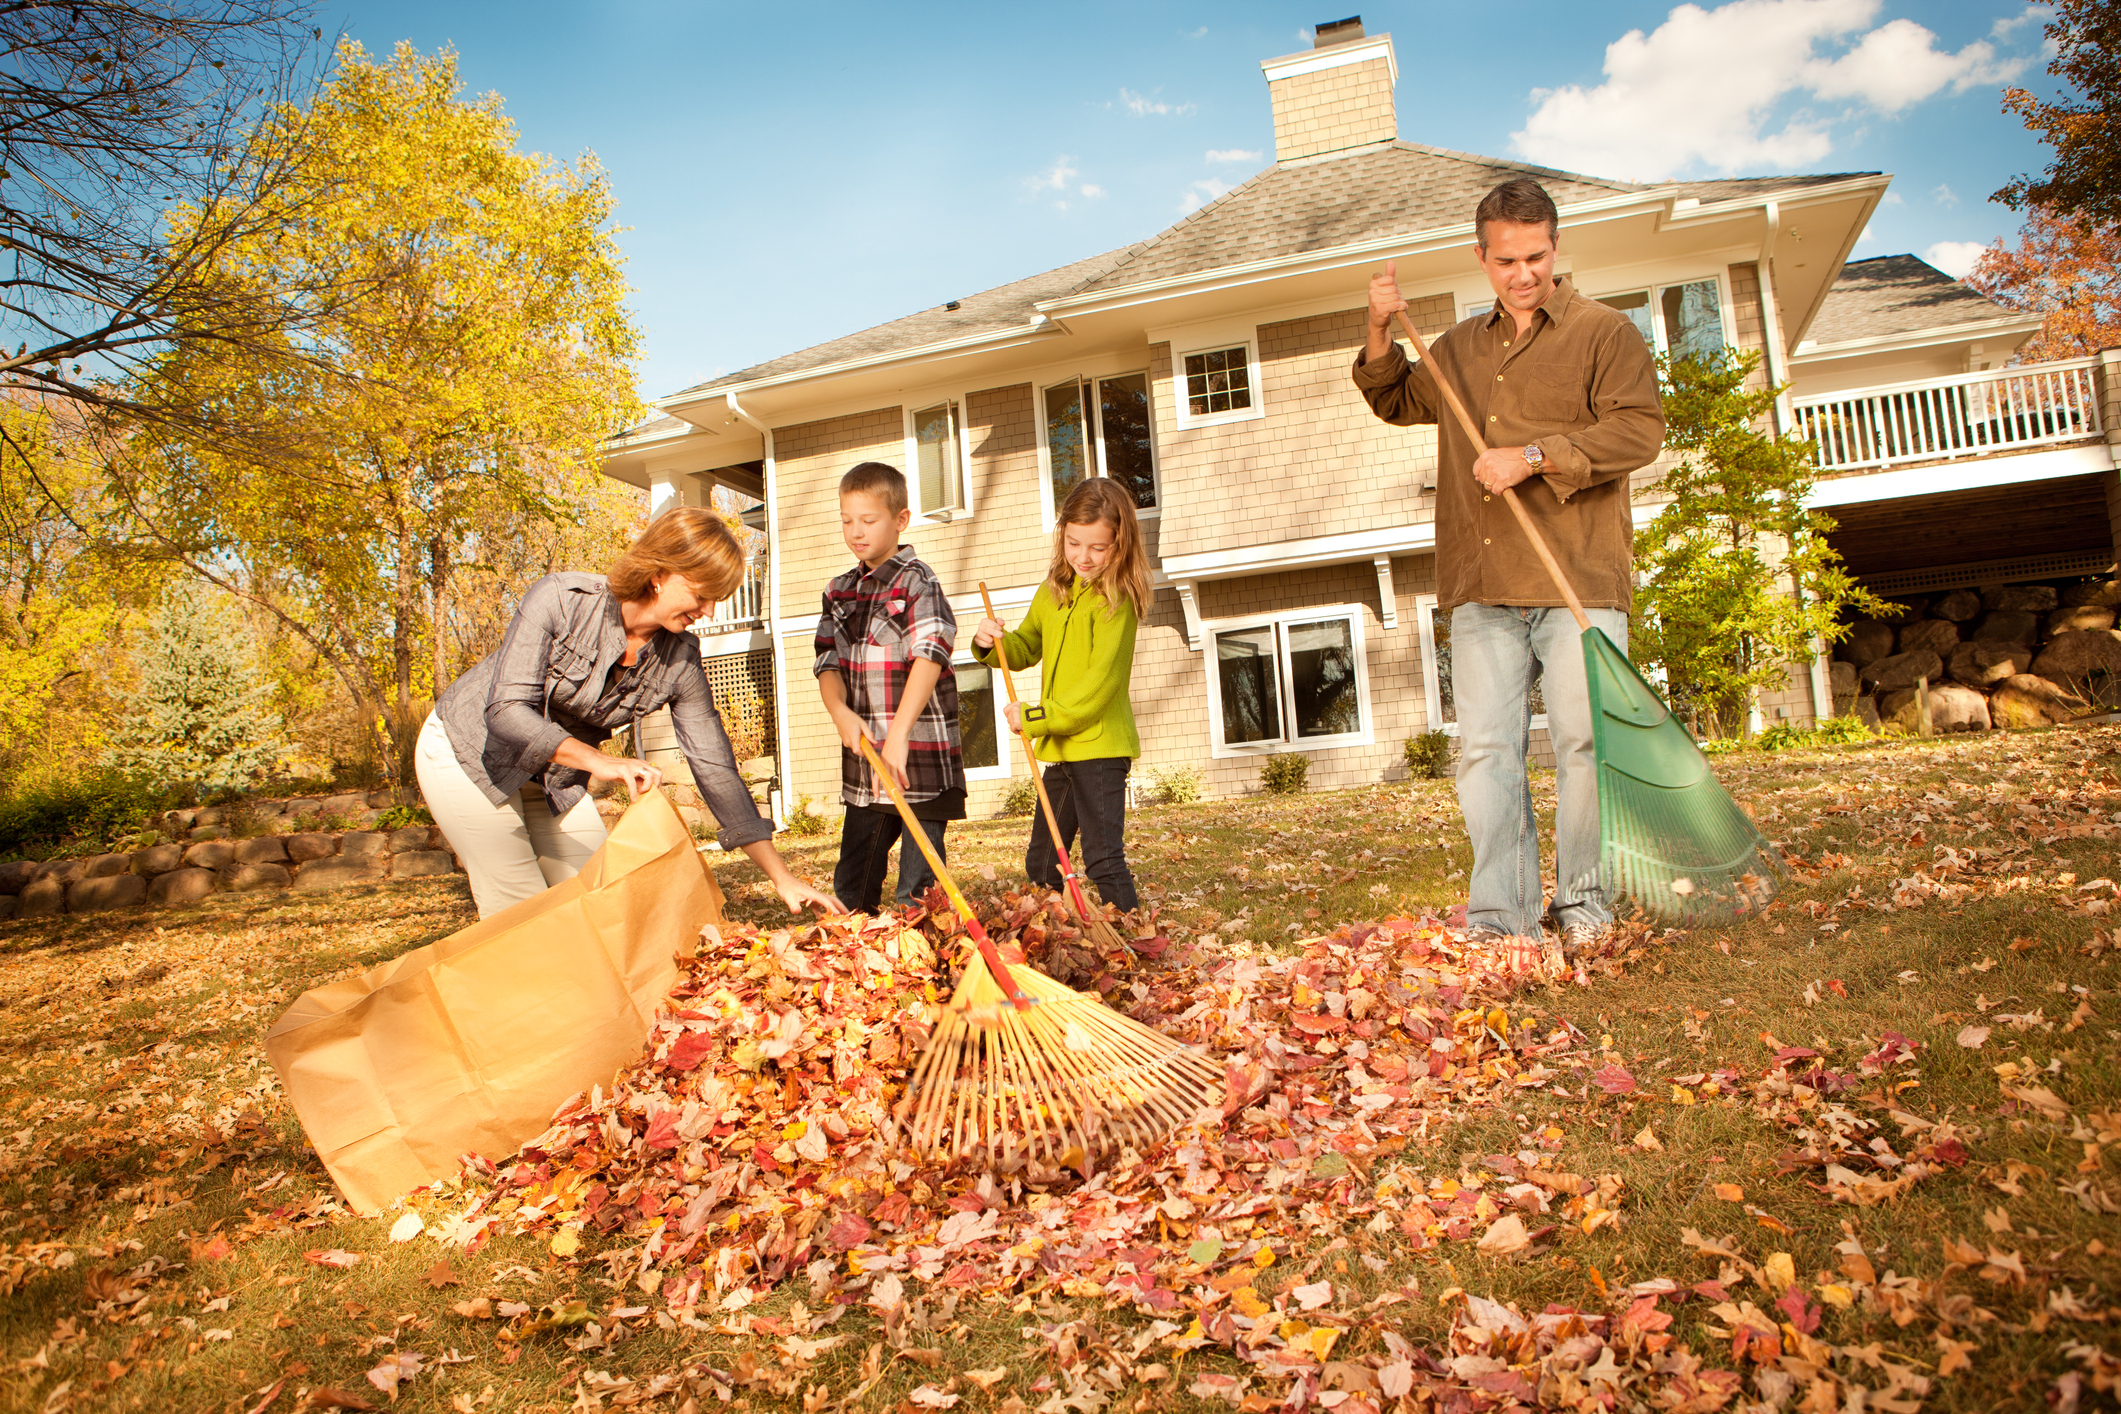 A mom, dad, daughter, and son raking leaves in front of their home in the fall